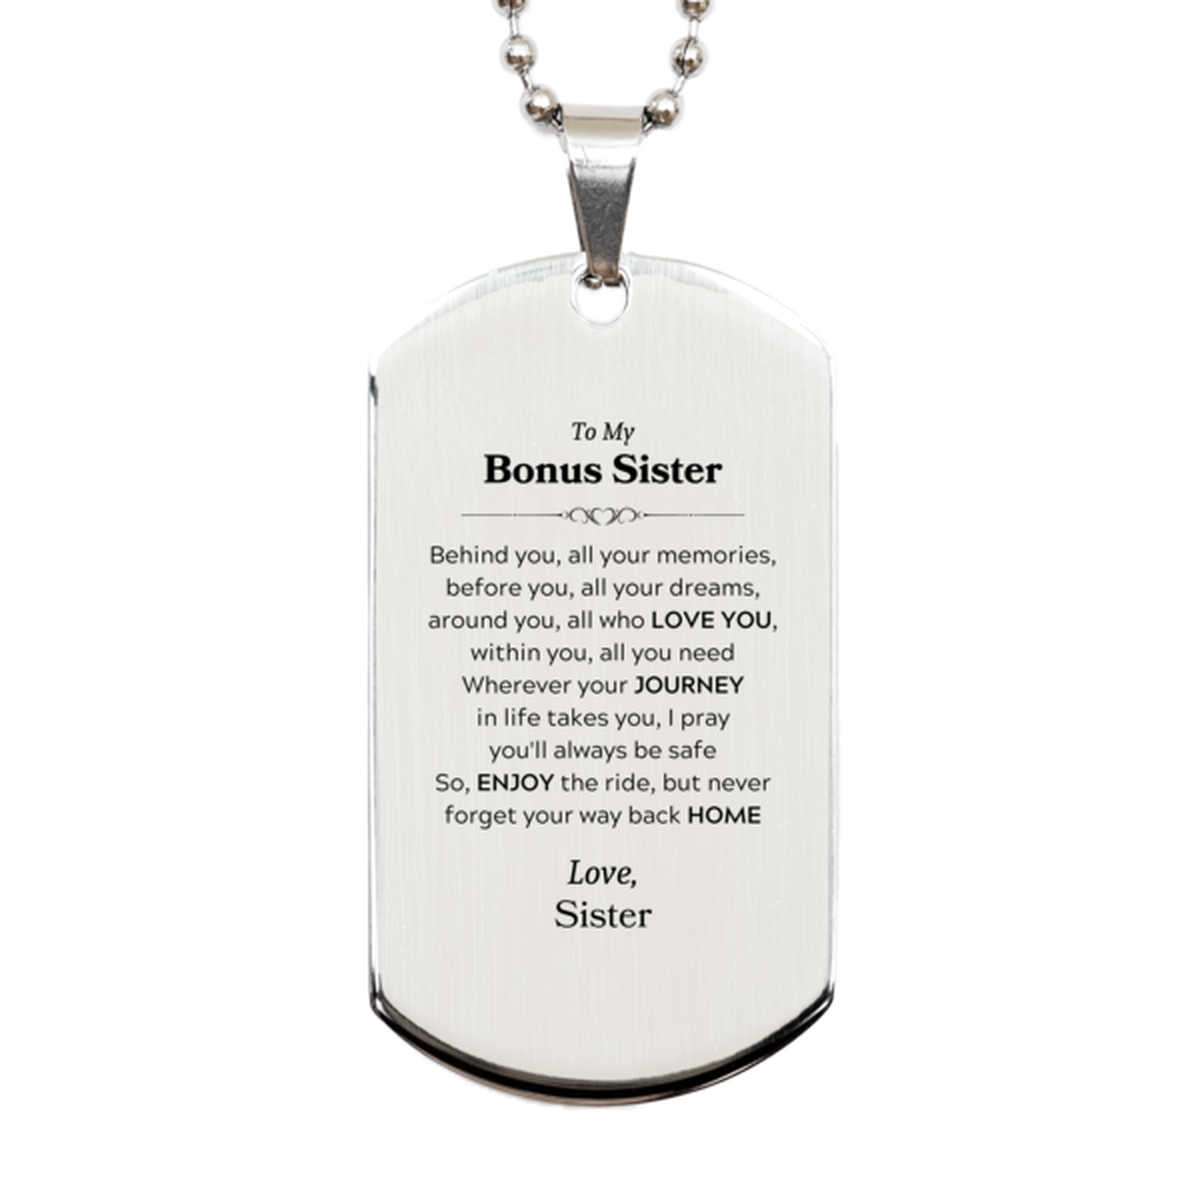 To My Bonus Sister Graduation Gifts from Sister, Bonus Sister Silver Dog Tag Christmas Birthday Gifts for Bonus Sister Behind you, all your memories, before you, all your dreams. Love, Sister